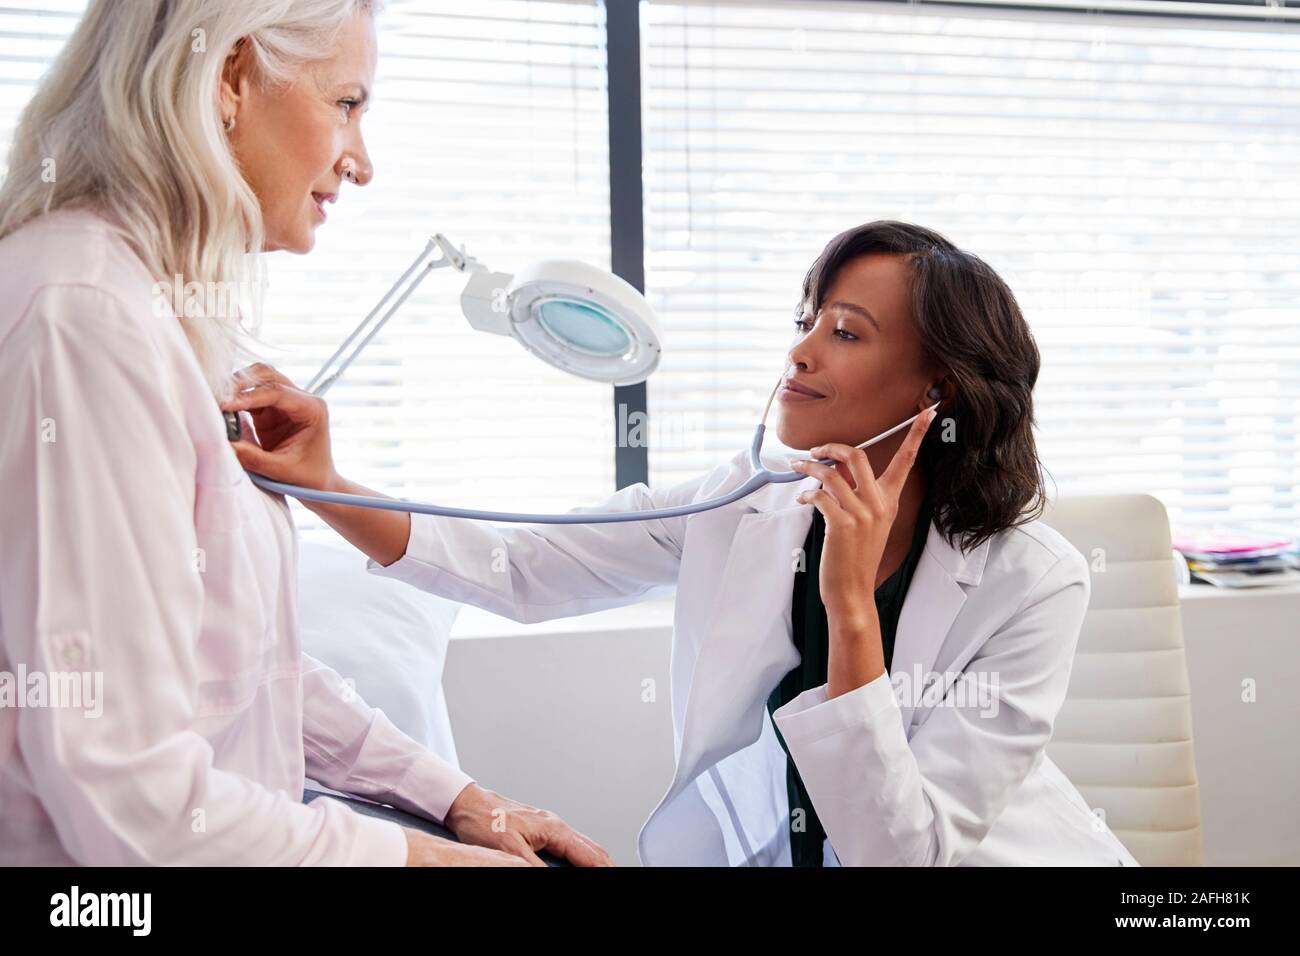 Woman Patient Having Medical Exam With Female Doctor In Office Stock Photo